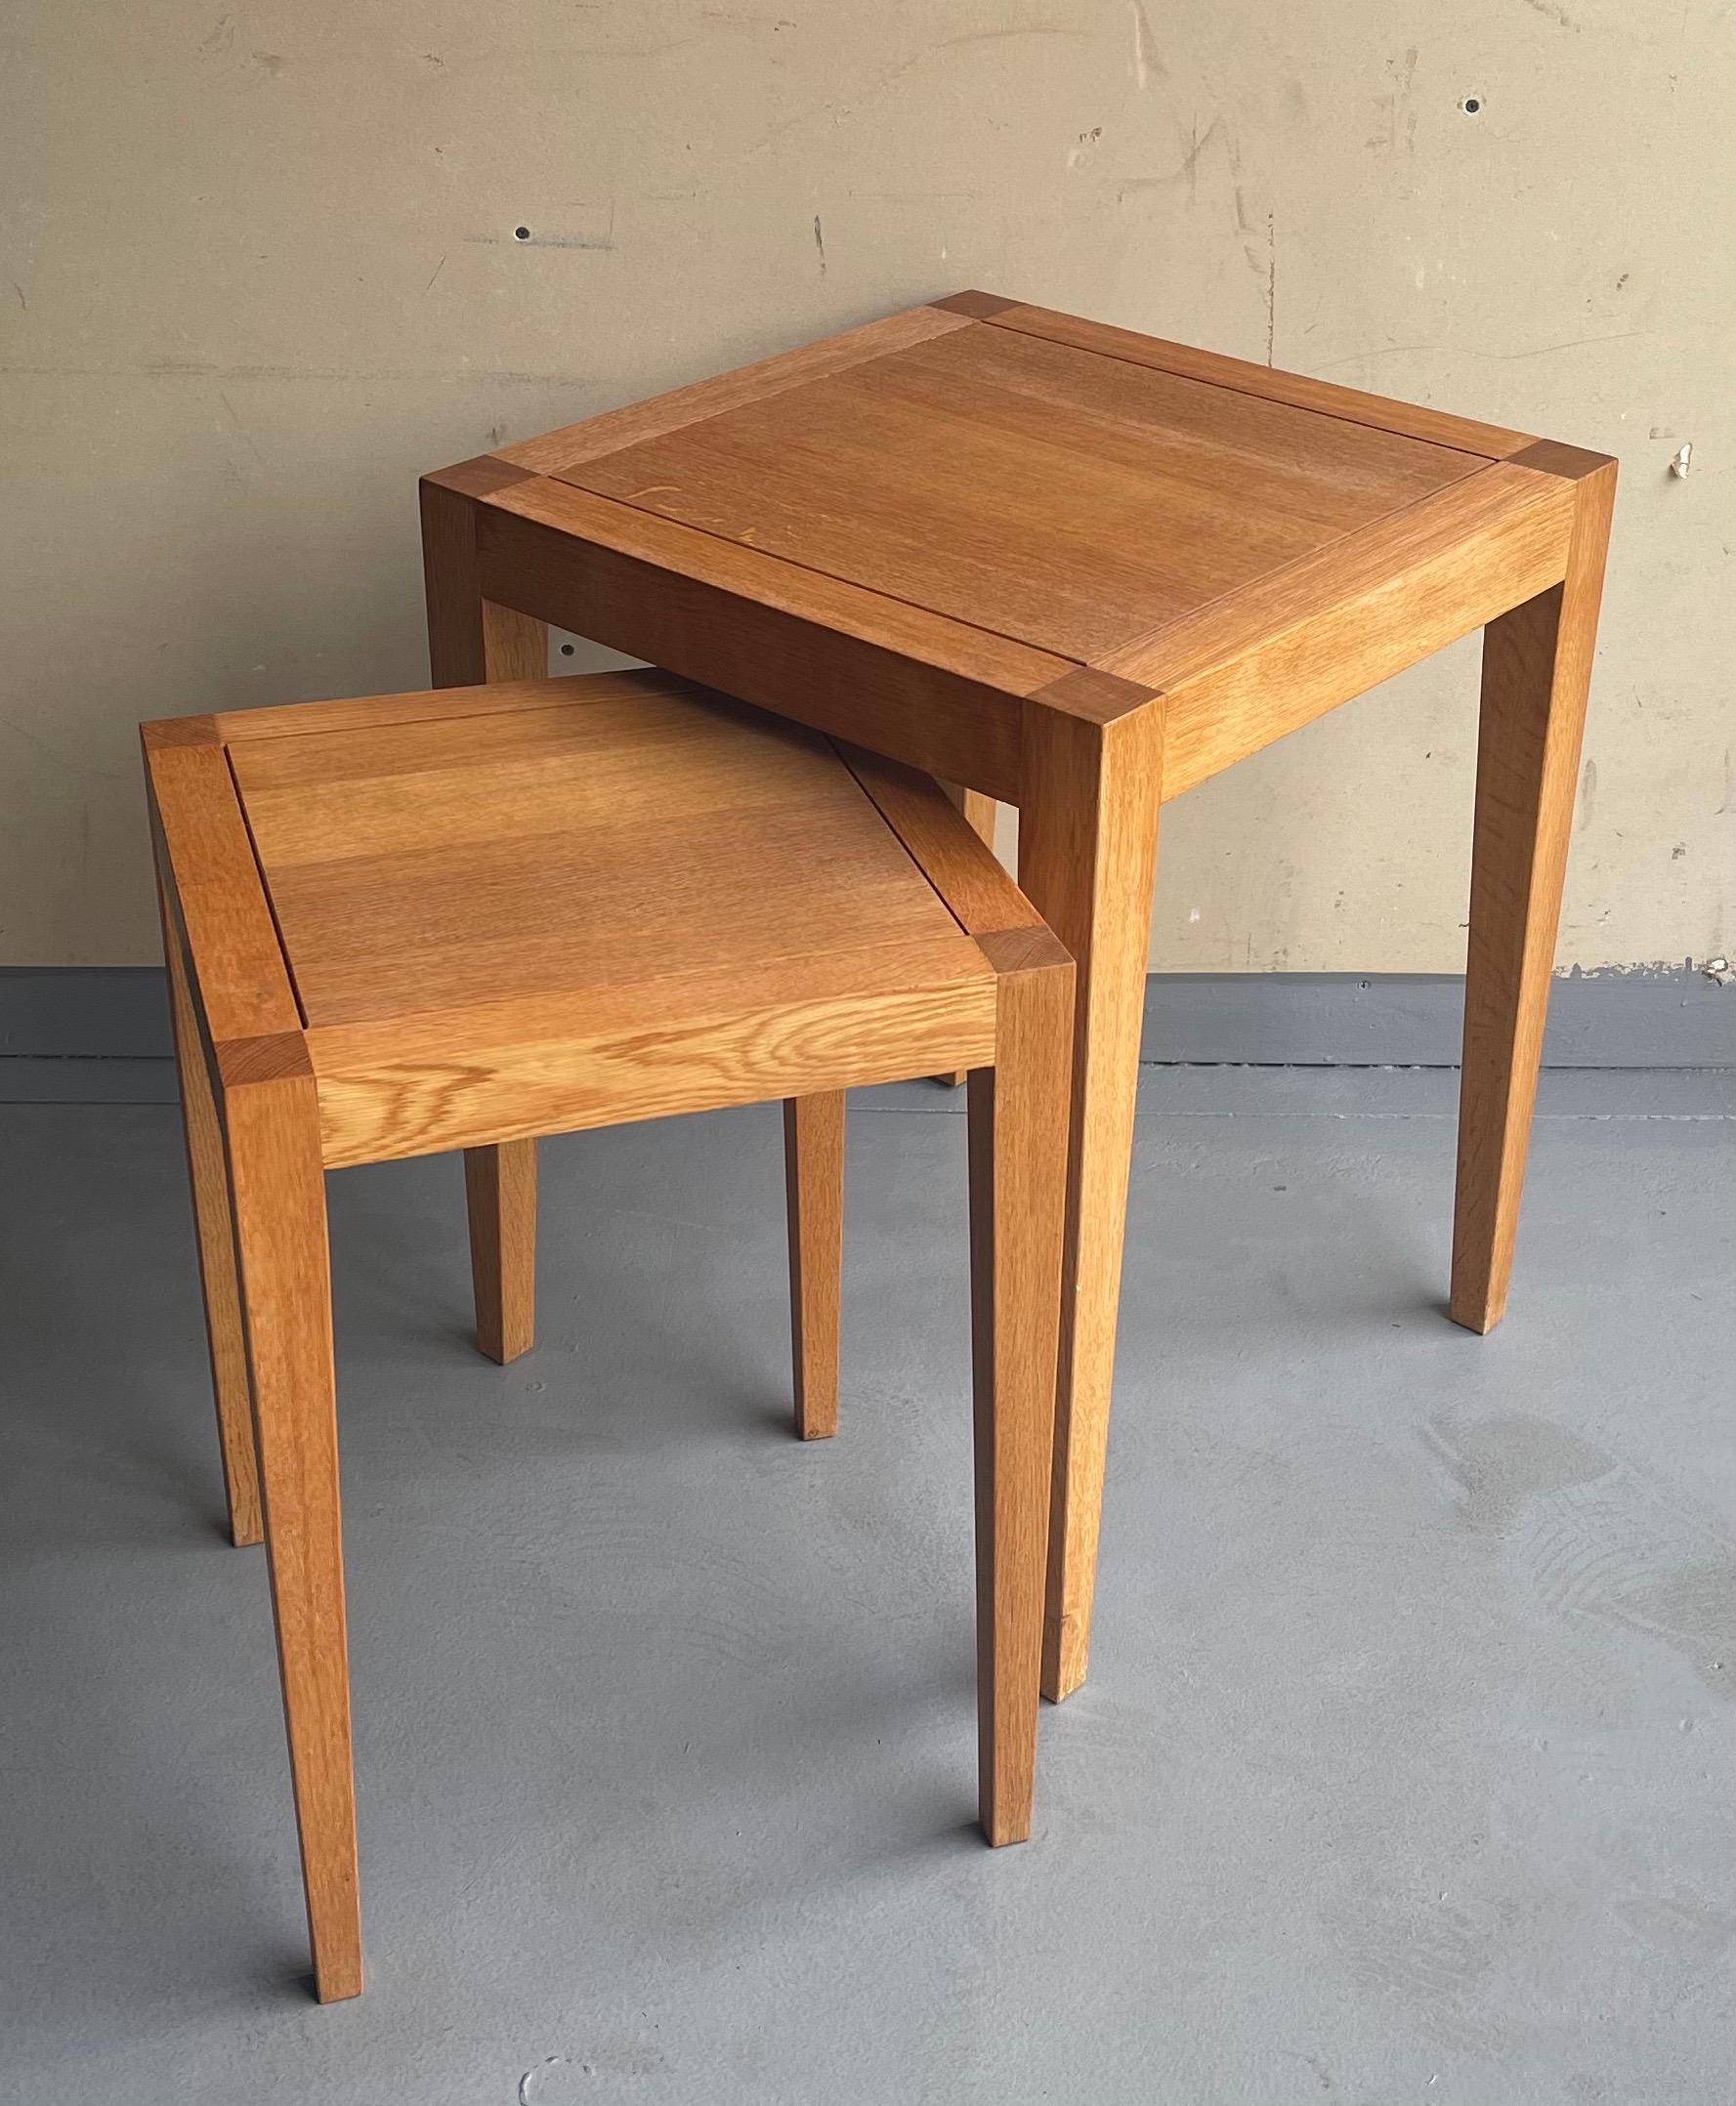 A very nice pair of square organic modern nesting tables by Gunther Lambert, circa 1980's. The tables are in very good vintage condition and I beleive are made of teak. The smaller one measures 15